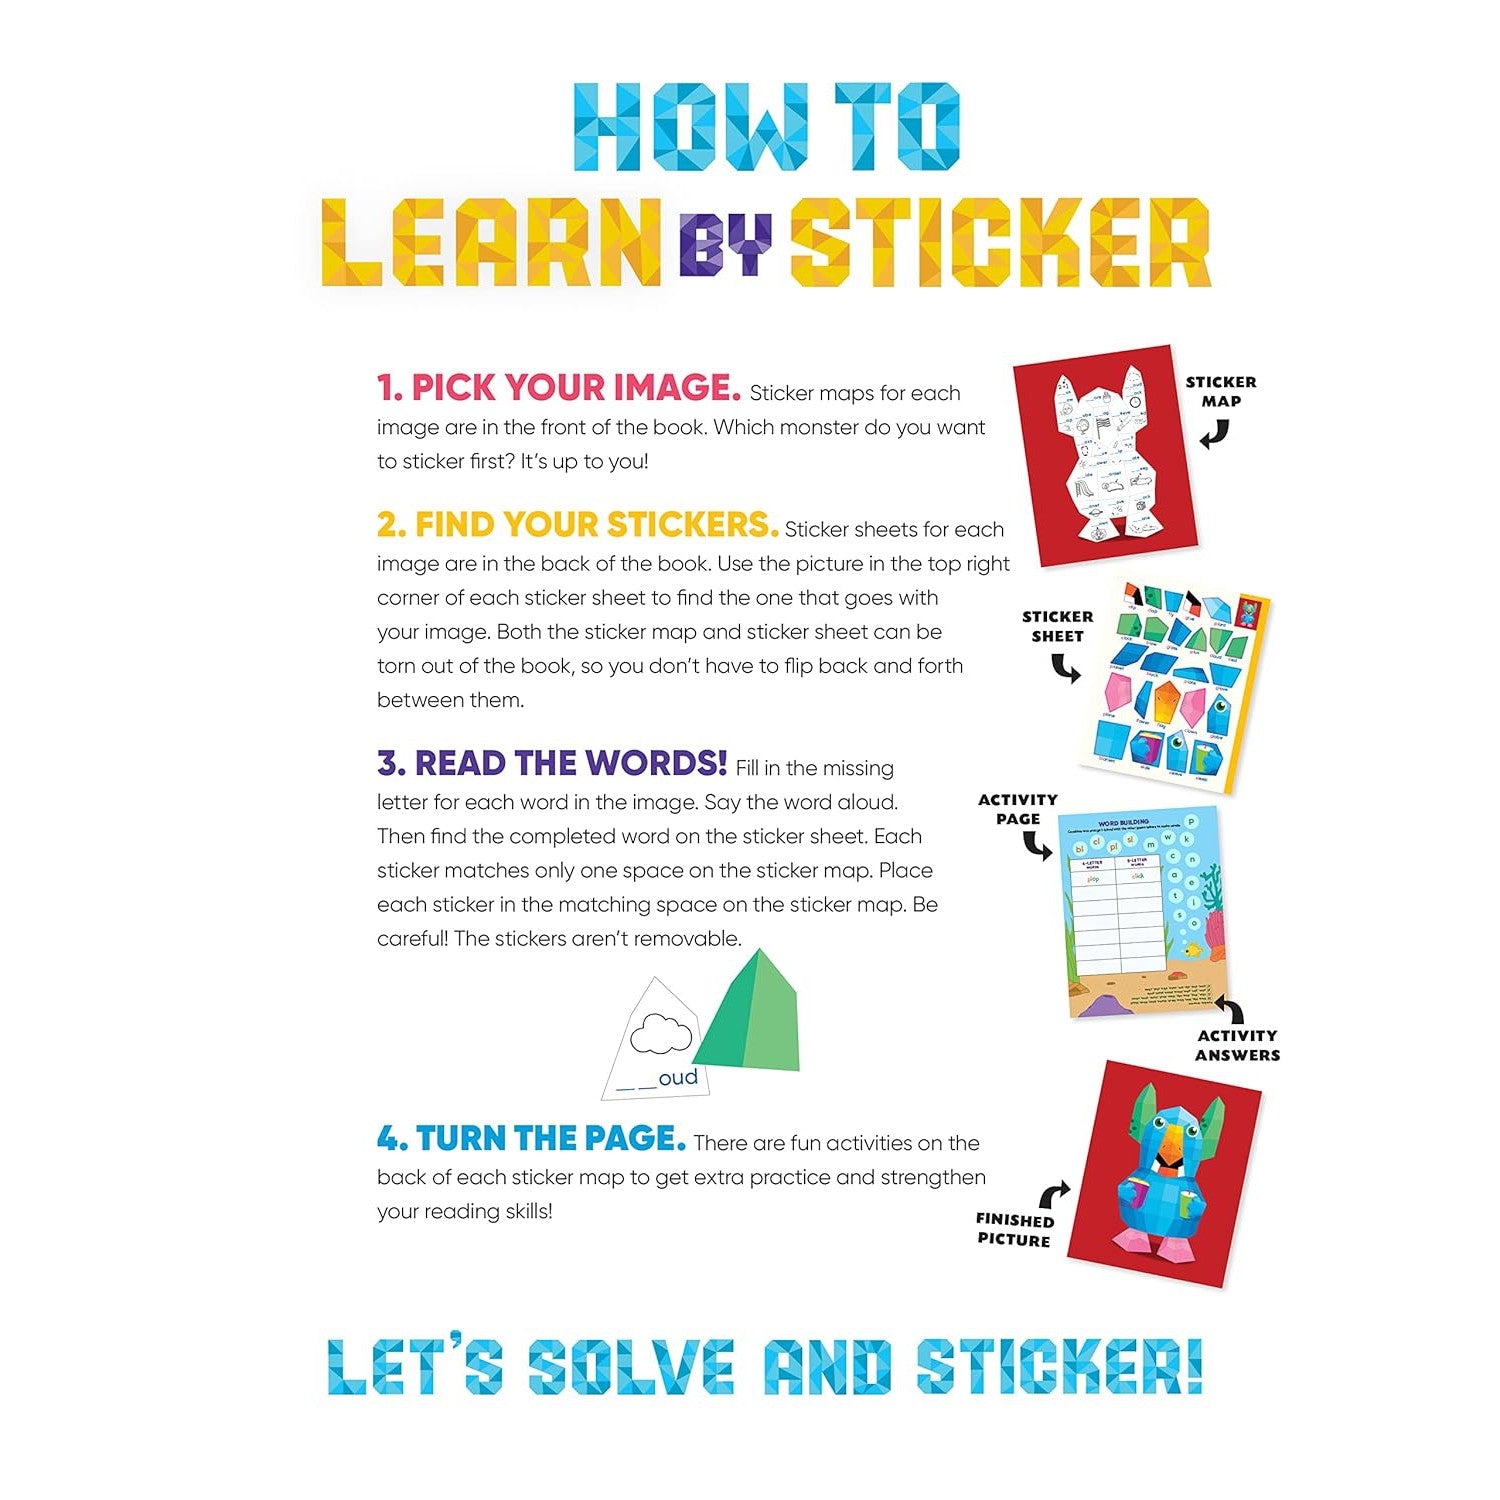 Learn by Sticker: Learn by Sticker: Beginning Phonics: Use Phonics to Create 10 Friendly Monsters!-HACHETTE BOOK GROUP USA-Little Giant Kidz